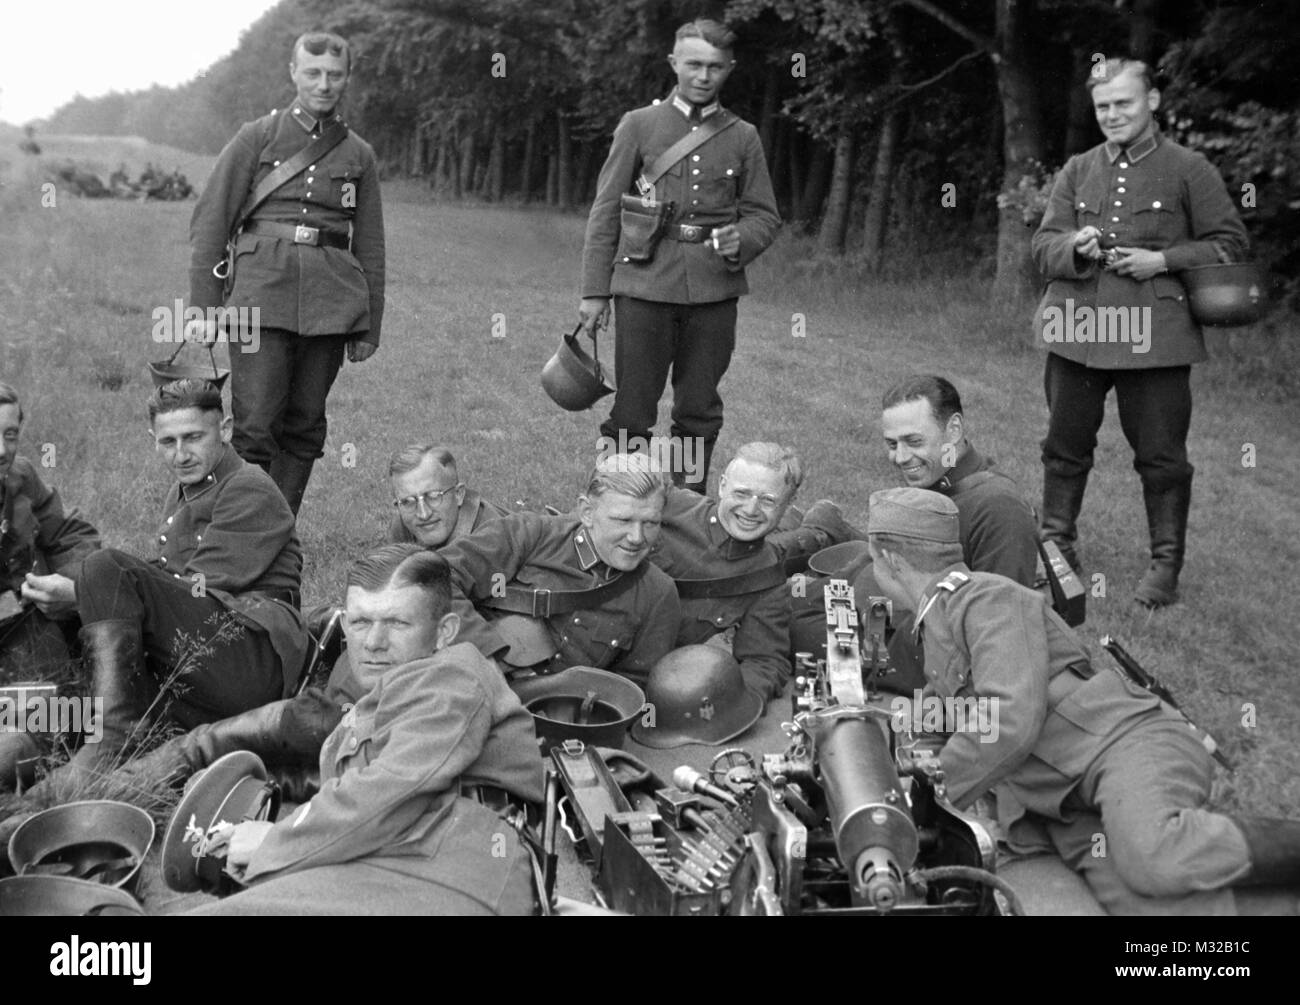 German soldiers relax during some downtime, ca. 1938. Stock Photo